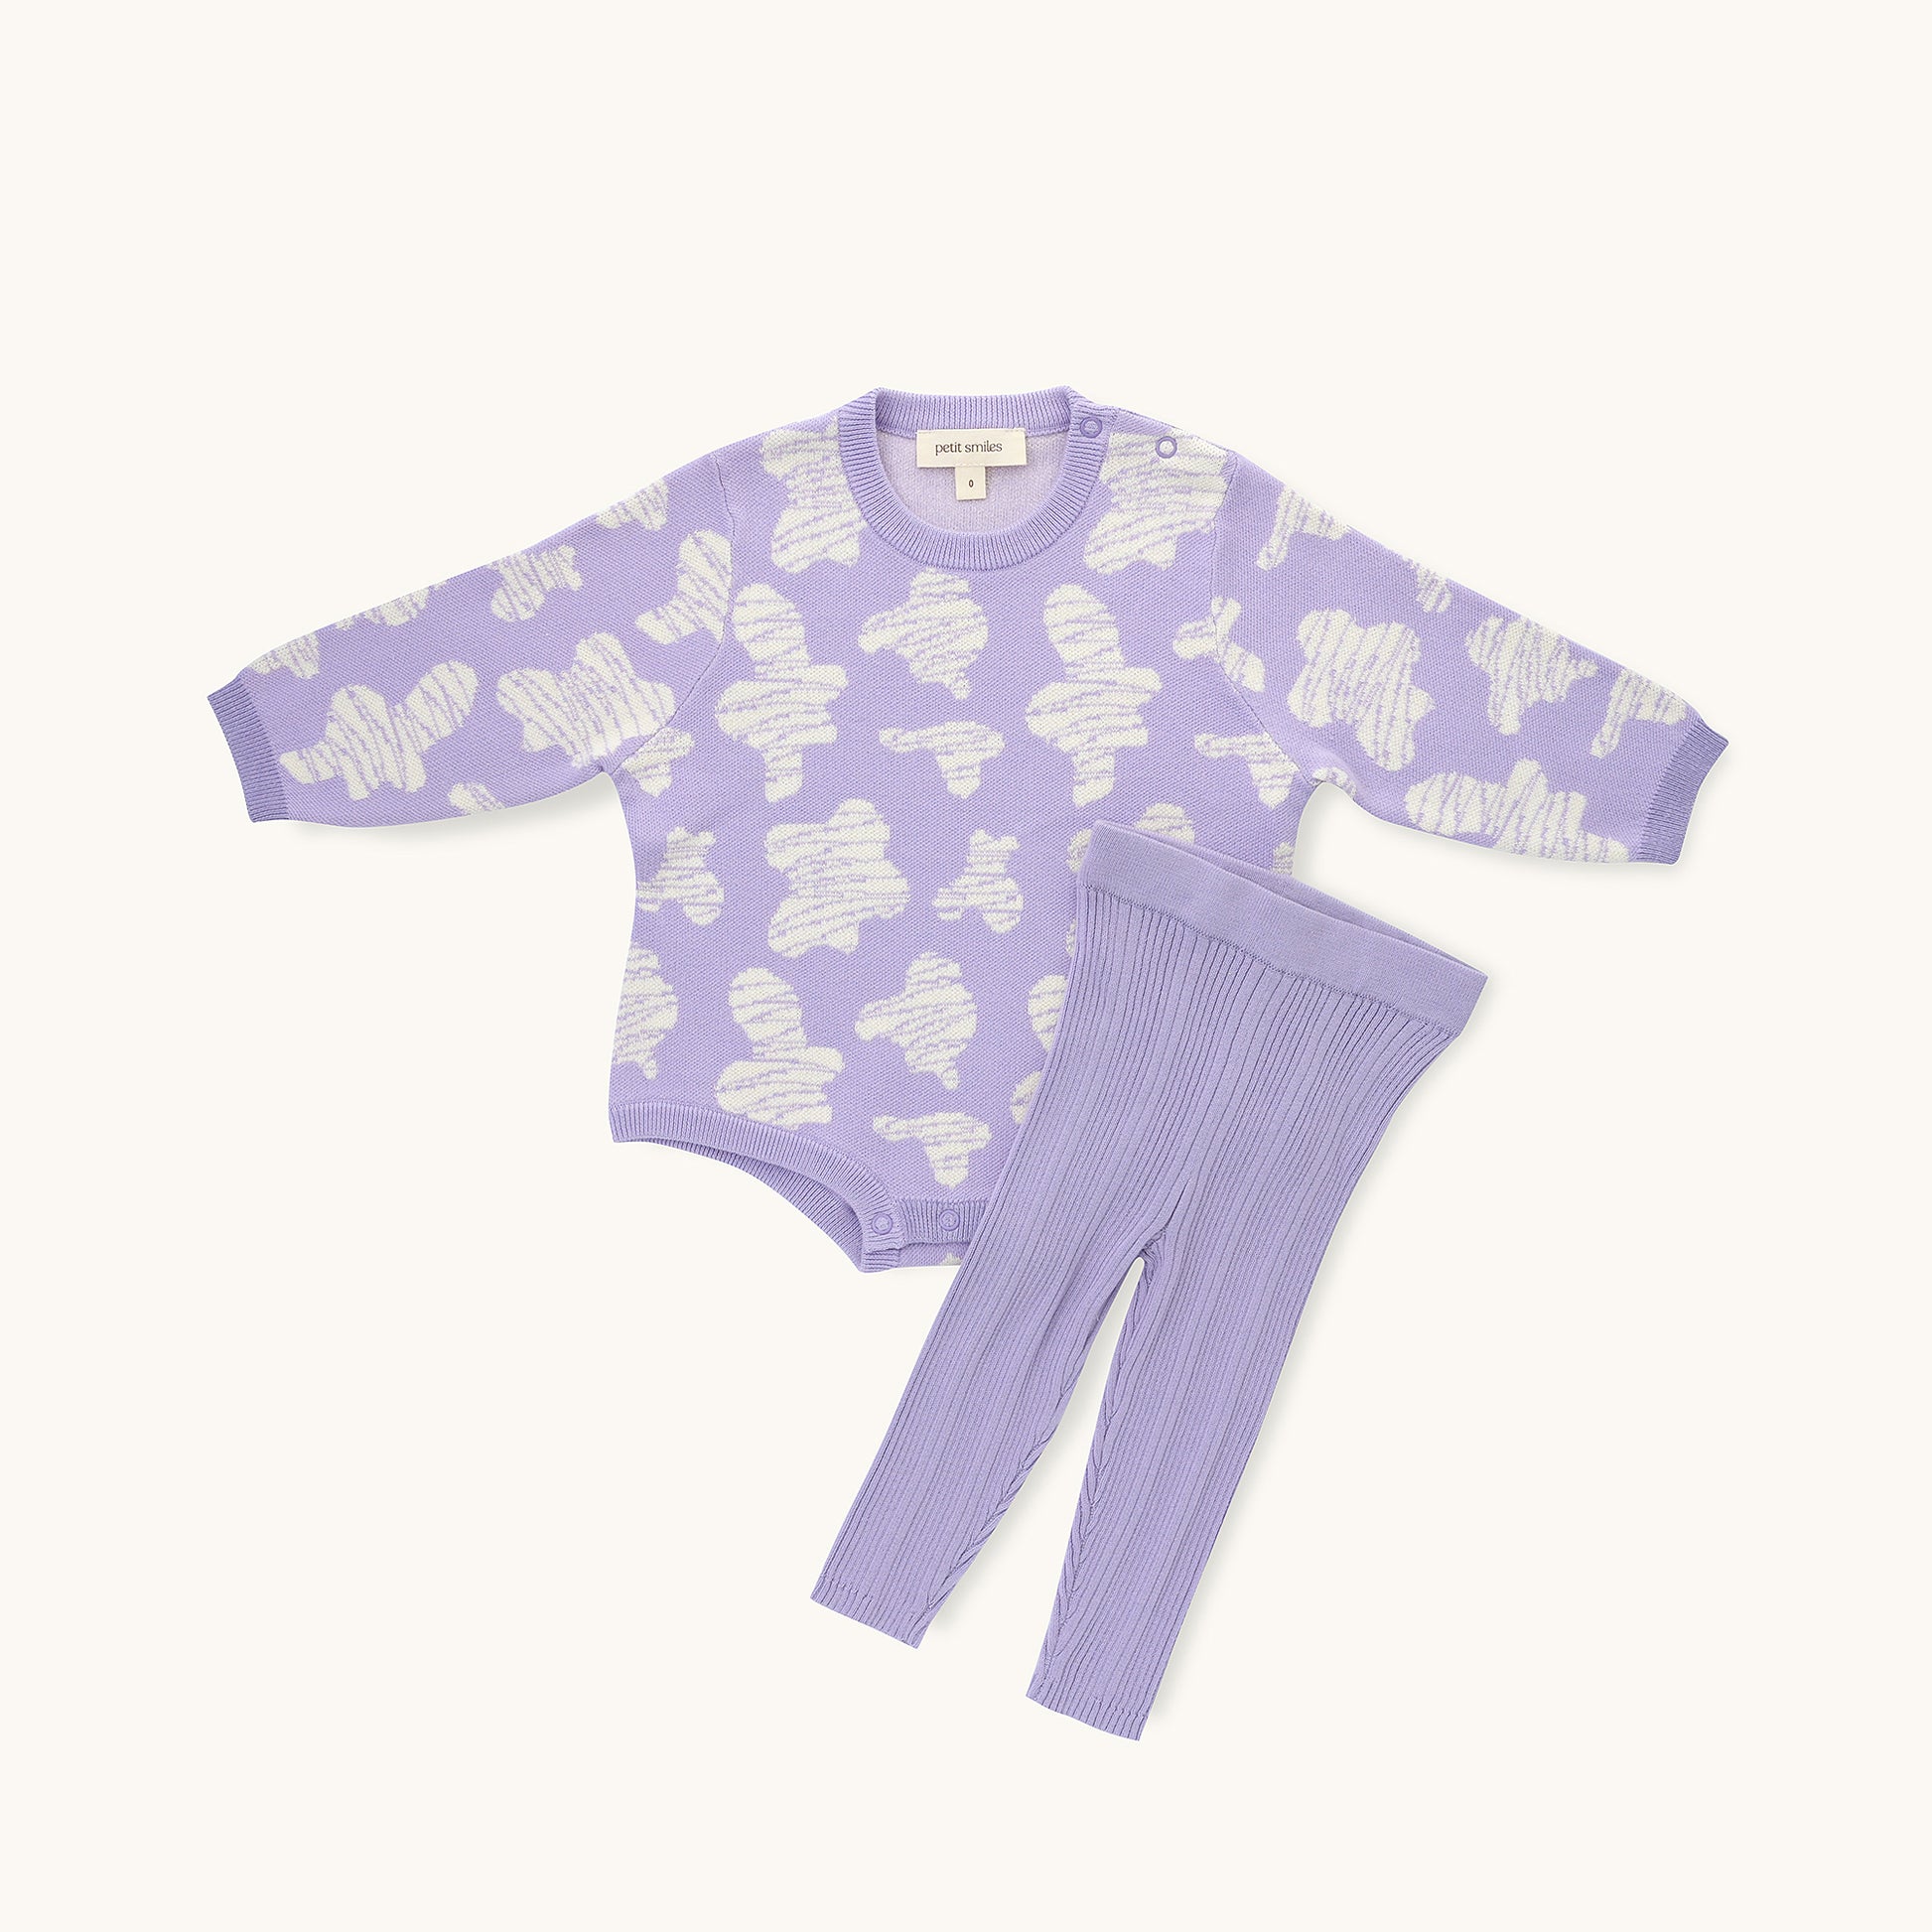 KNITTED SPOTS ROMPER - TARO; 100% Organic Cotton; Jacquard Romper made from GOTS-certified organic cotton; 'TARO SPOTS' Jacquard pattern; Rib hem at neck, cuffs and leg opening; Features convenient press snaps at the crotch for effortless dressing; Oversized fit.